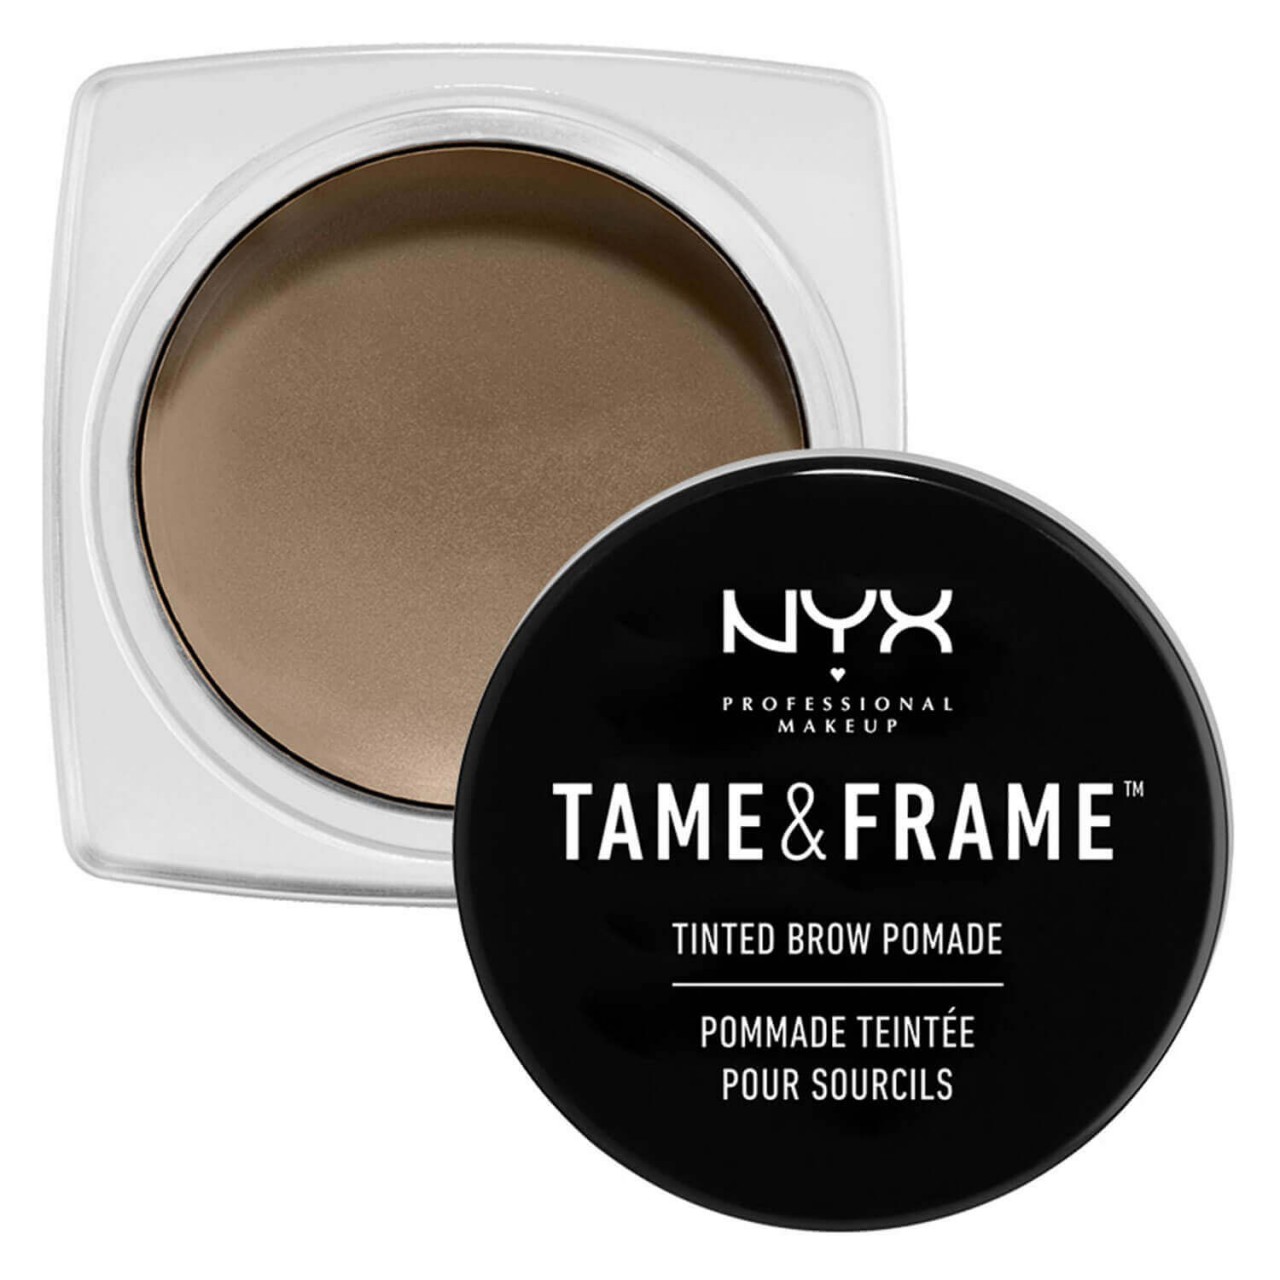 Tame & Frame - Tinted Brow Pomade Blonde von NYX Professional Makeup